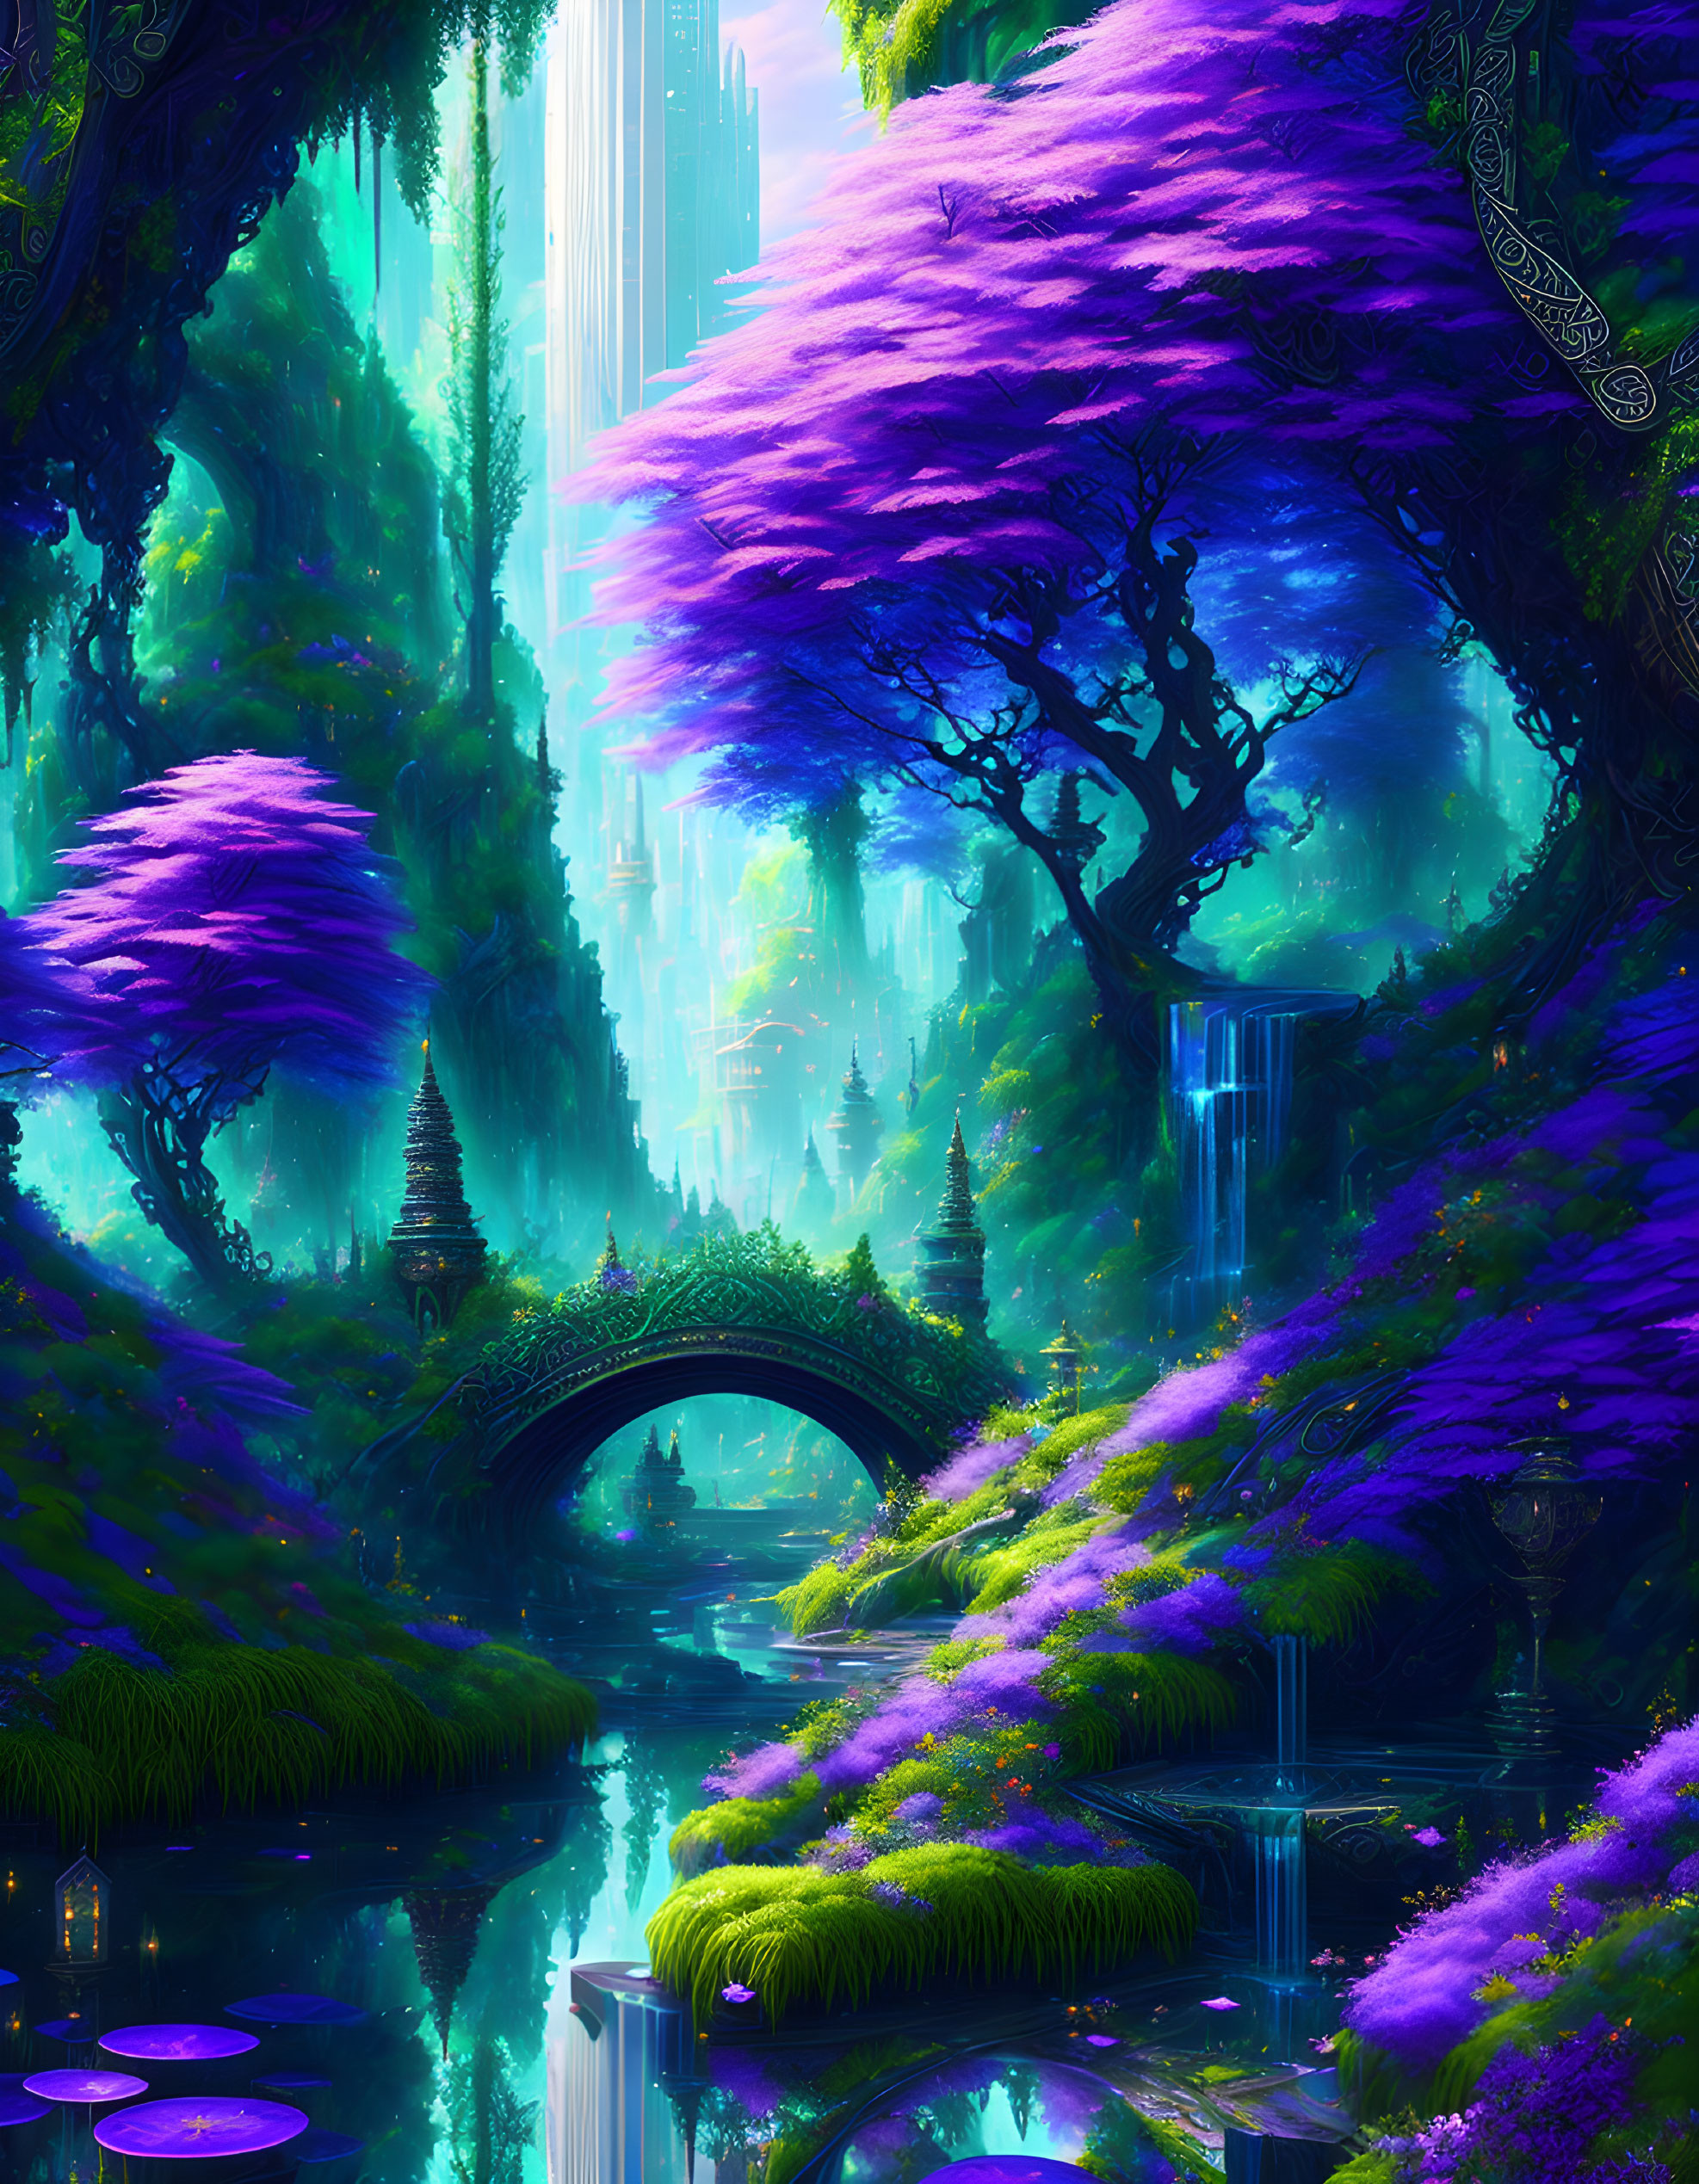 Fantasy forest with purple foliage, stone bridge, river, waterfalls, and mystical structures